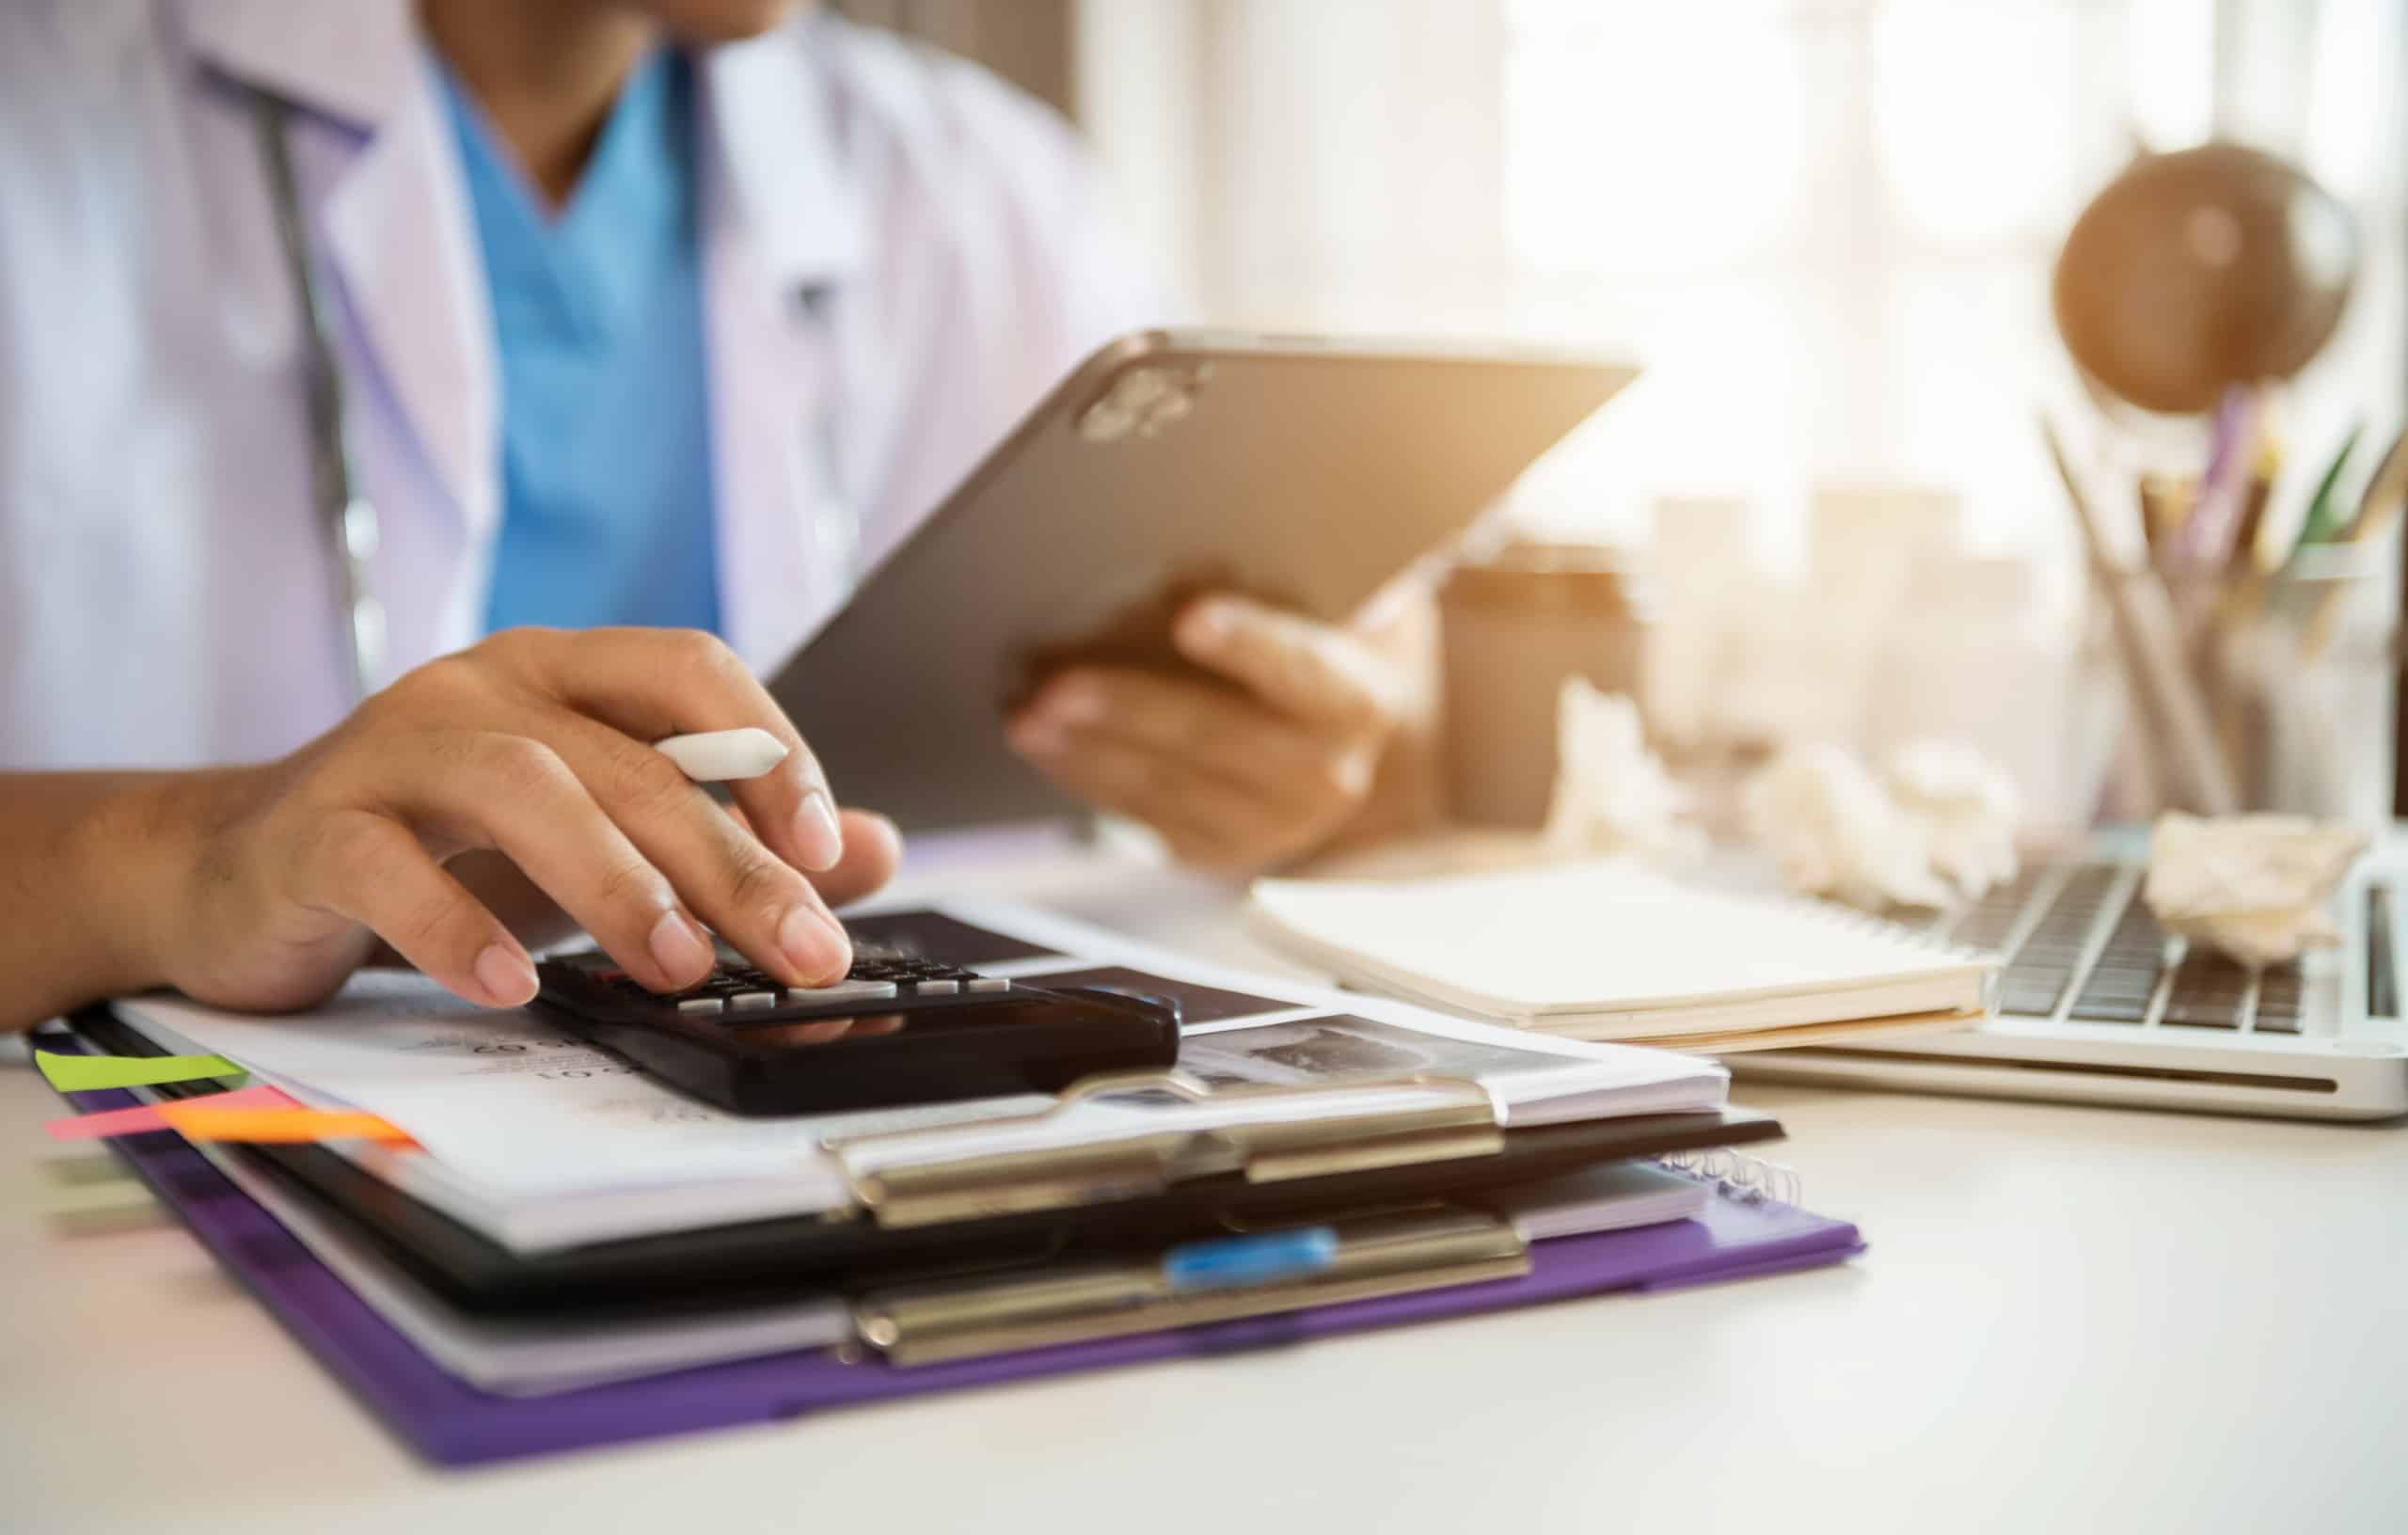 A doctor is utilizing a tablet at his desk to access local healthcare insurance benefits.